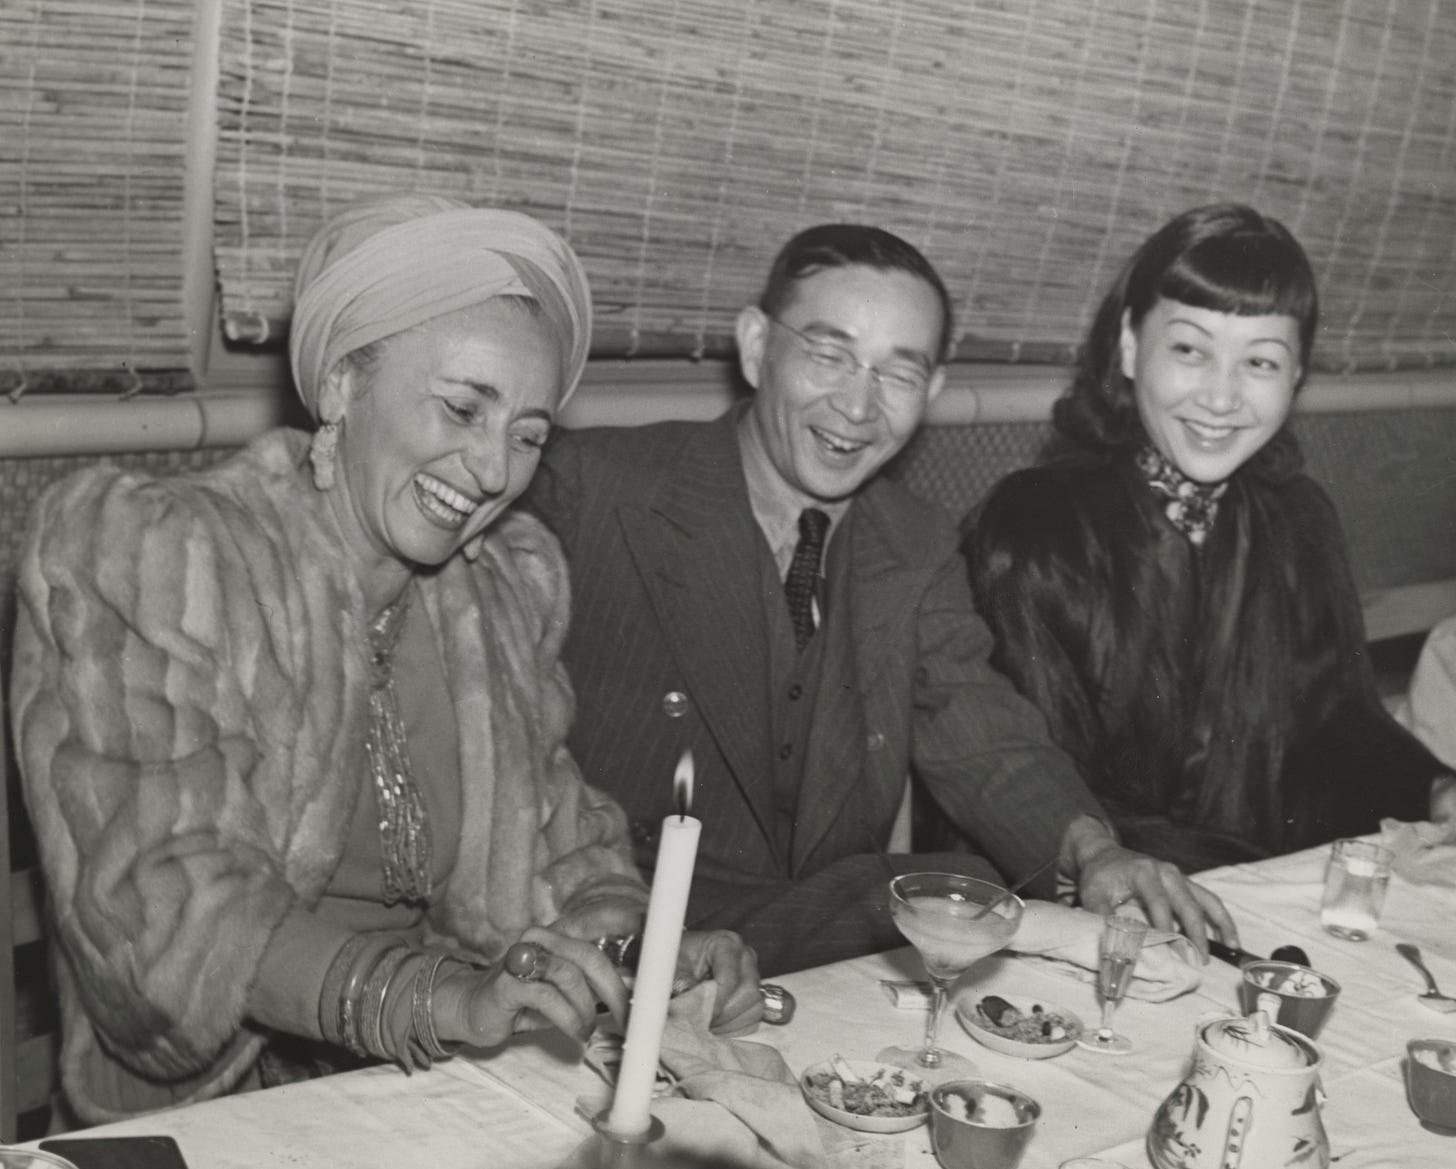 Bernardine Fritz in furs and turban and jewels, Lin Yutang in between her and AMW also wearing a dark fur coat, sitting at a dinner table and laughing together